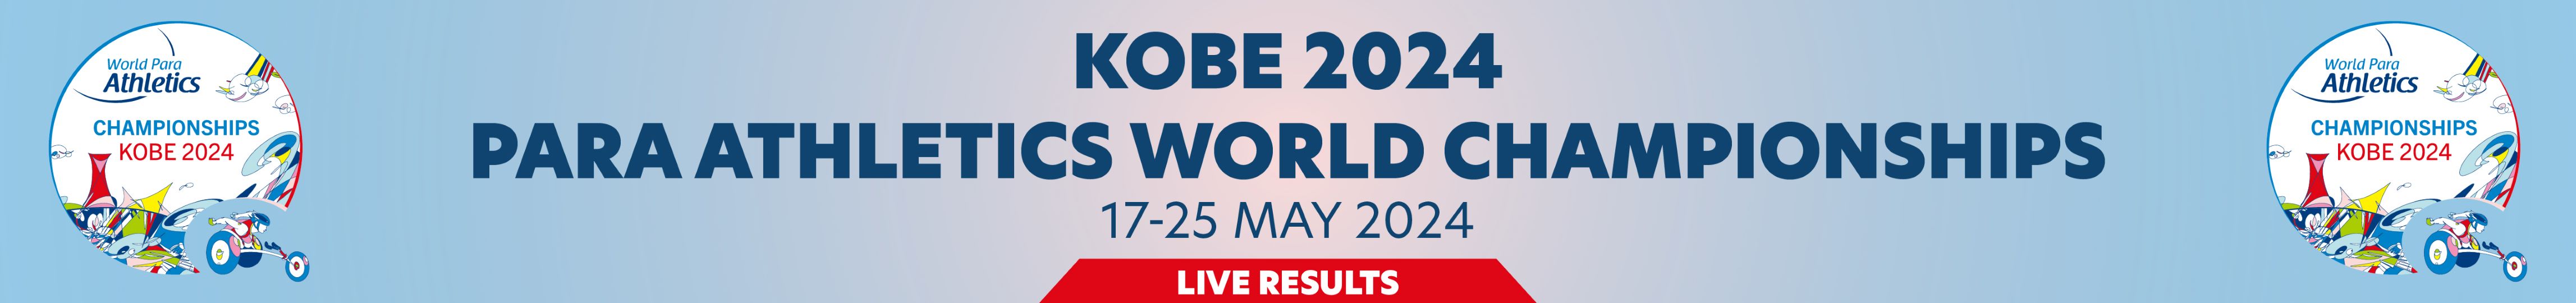 The banner of the Kobe 2024 Para Athletics World Championships Live Results